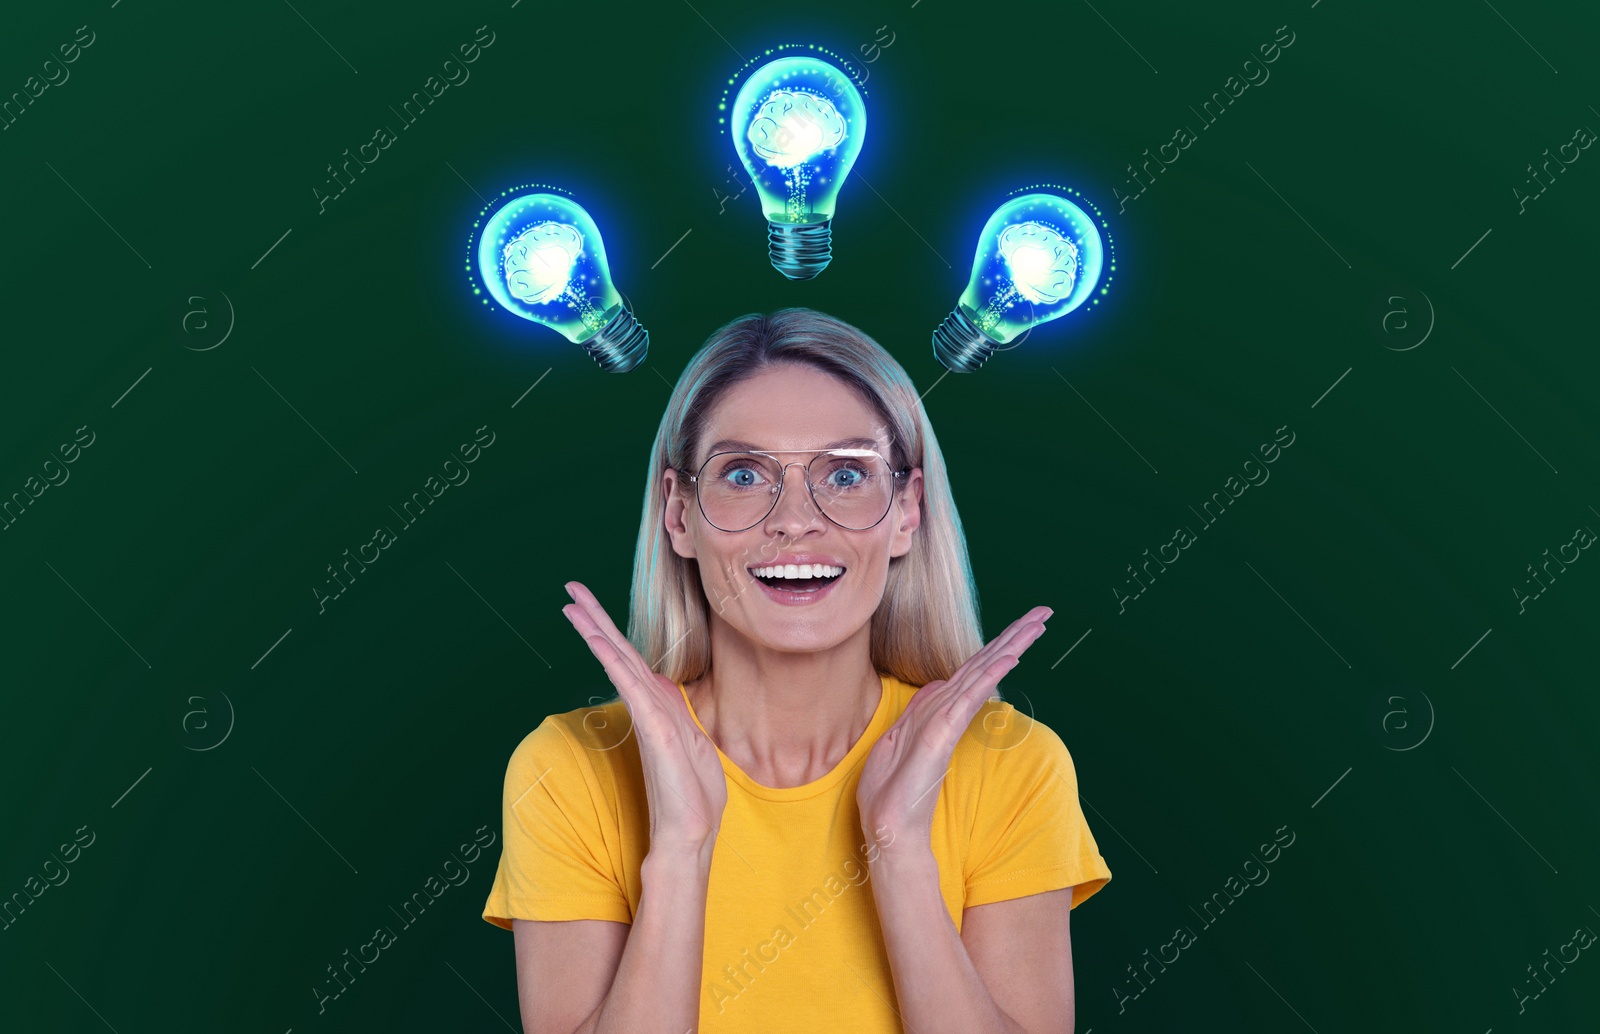 Image of Idea generation. Woman on green background. Illustrations of light bulb over her